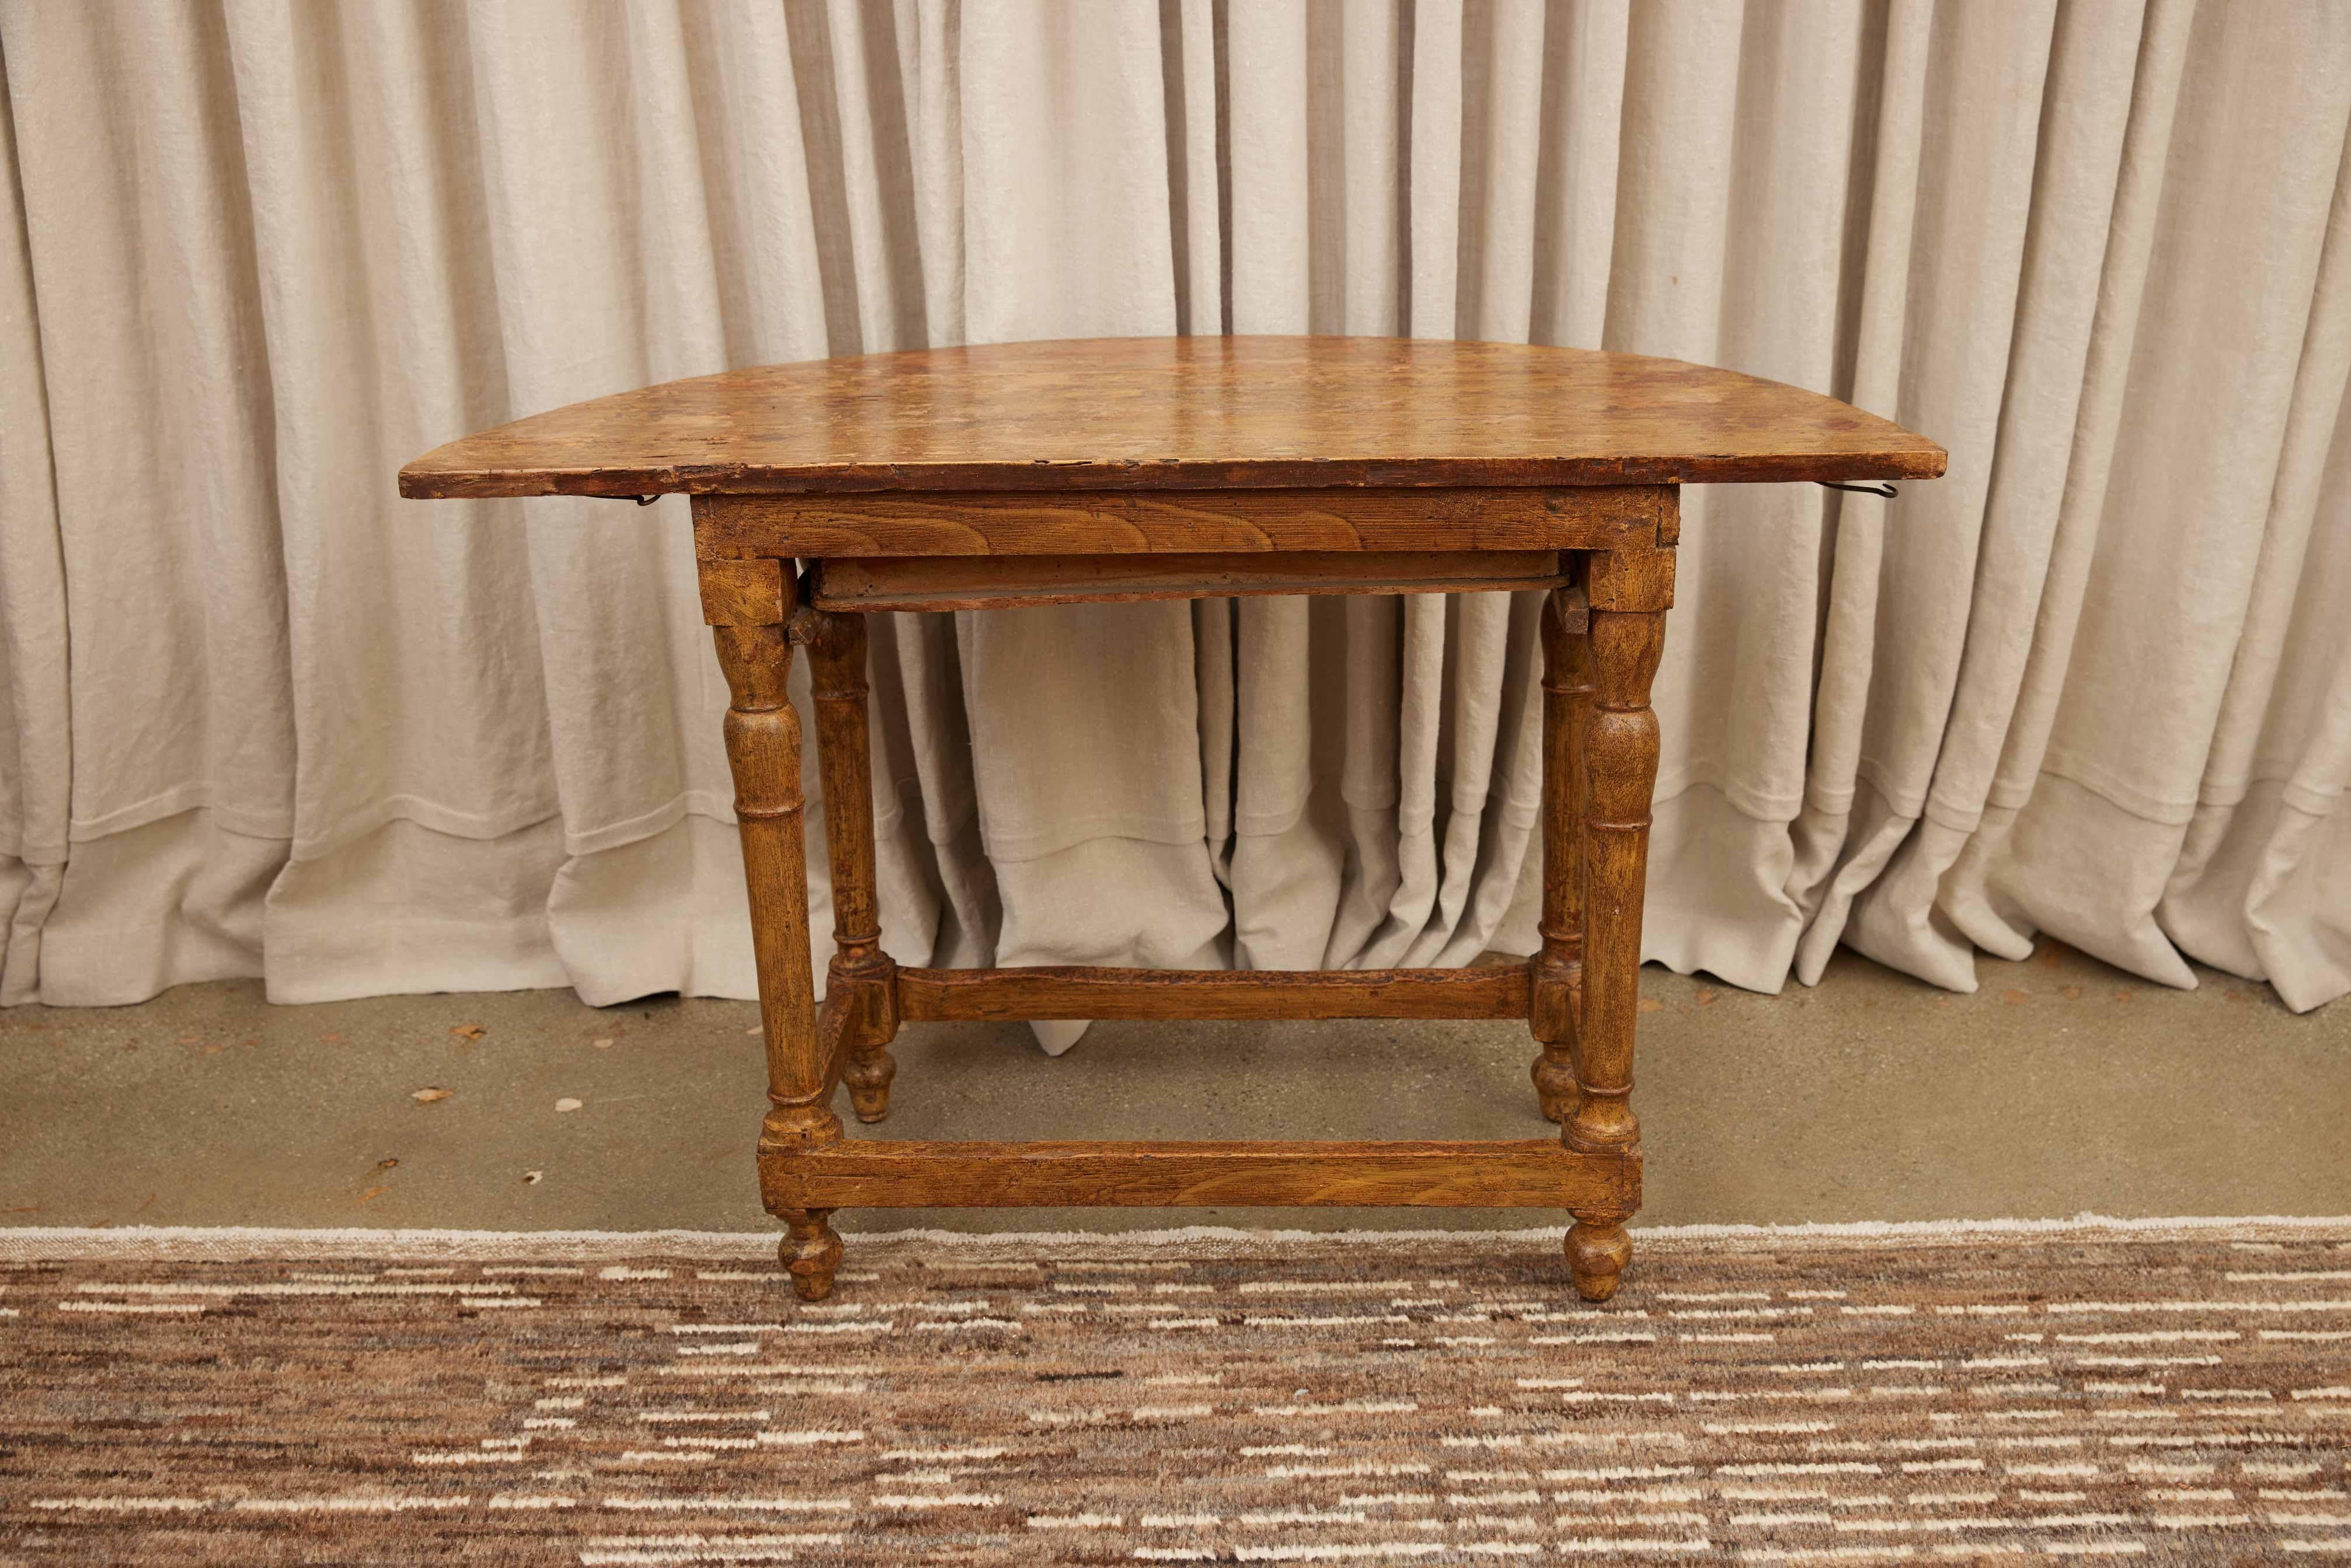 French Demilune Table 19th Century
Discover the elegance of historical craftsmanship with this early 19th-century oak work table. Exuding timeless appeal, this piece features beautifully turned legs that demonstrate the artisan's skill and attention